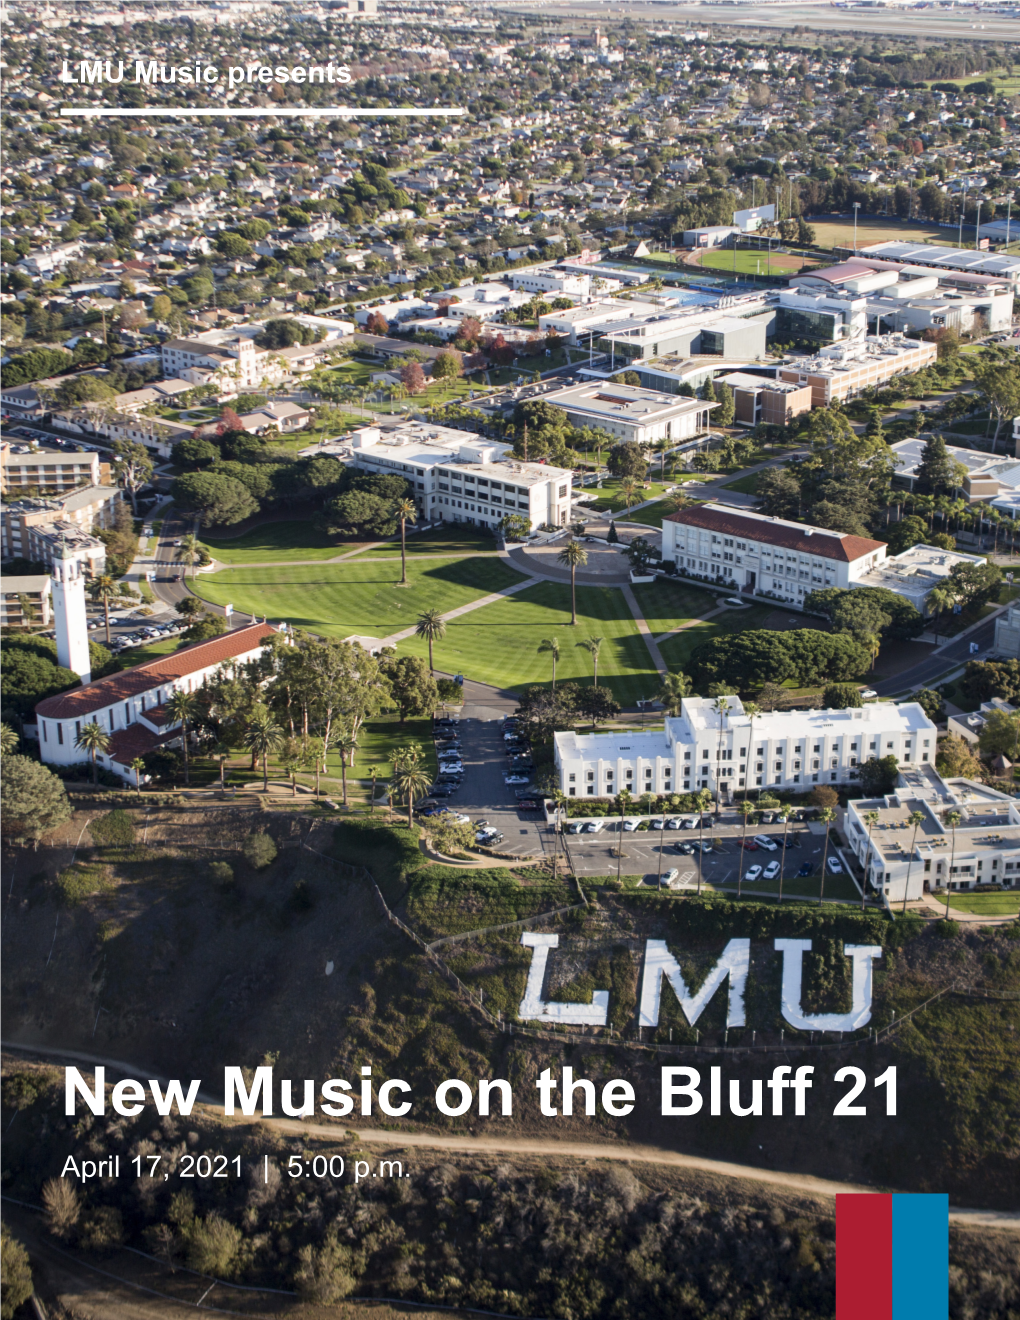 New Music on the Bluff 21 April 17, 2021 | 5:00 P.M